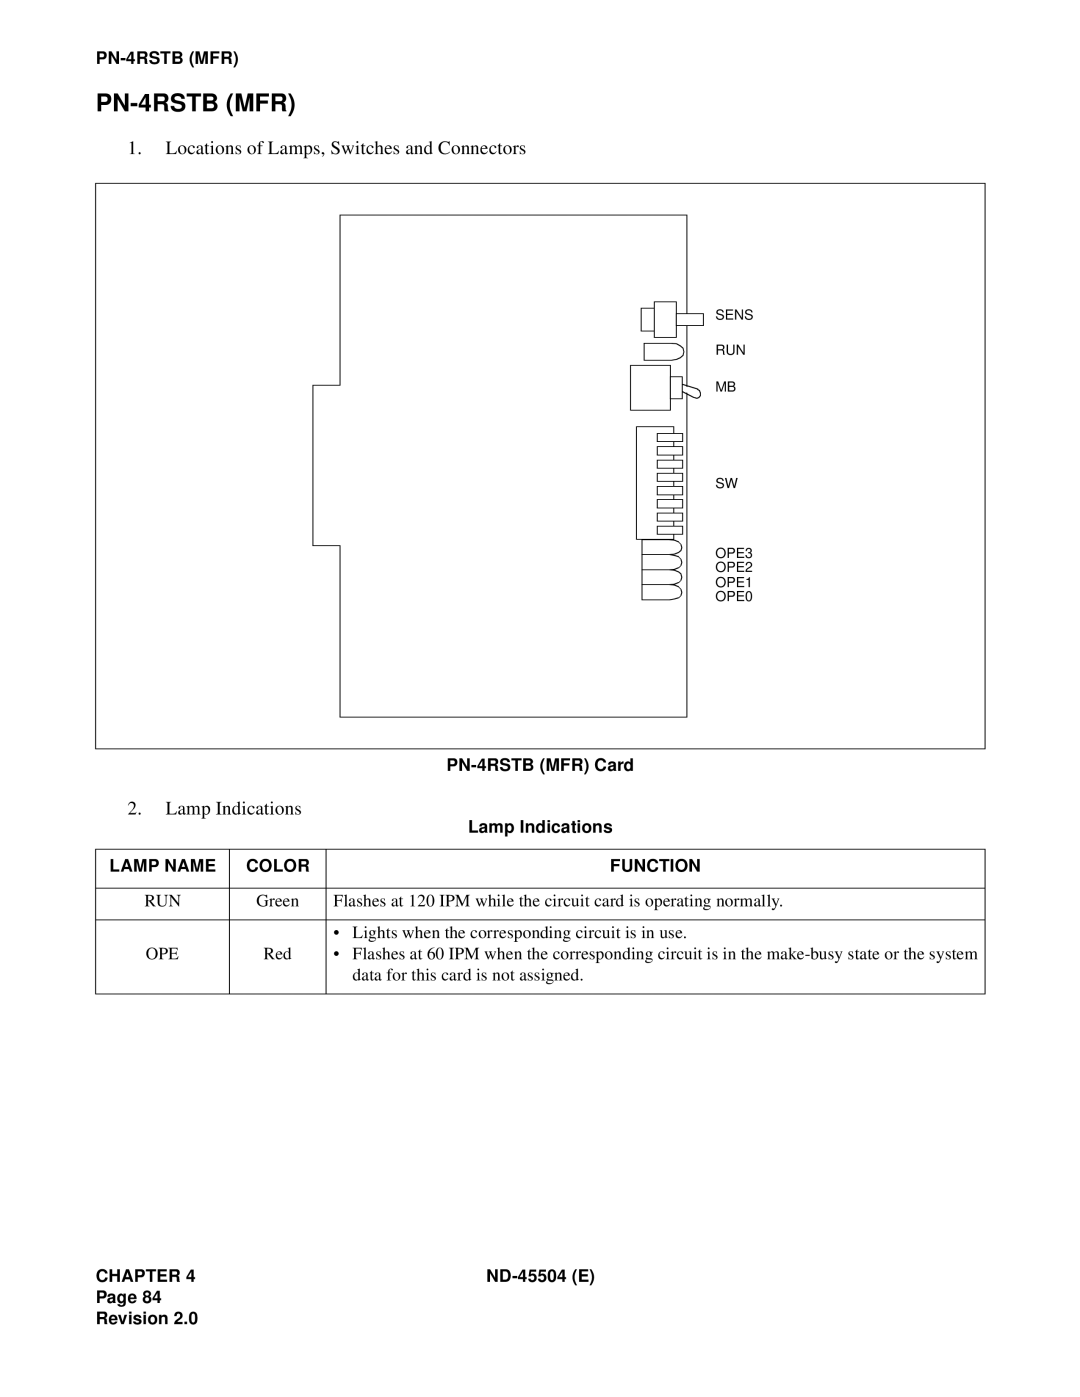 NEC 2000 IVS manual Locations of Lamps, Switches and Connectors, Lamp Indications, PN-4RSTBMFR Card, Lamp Name, Color 